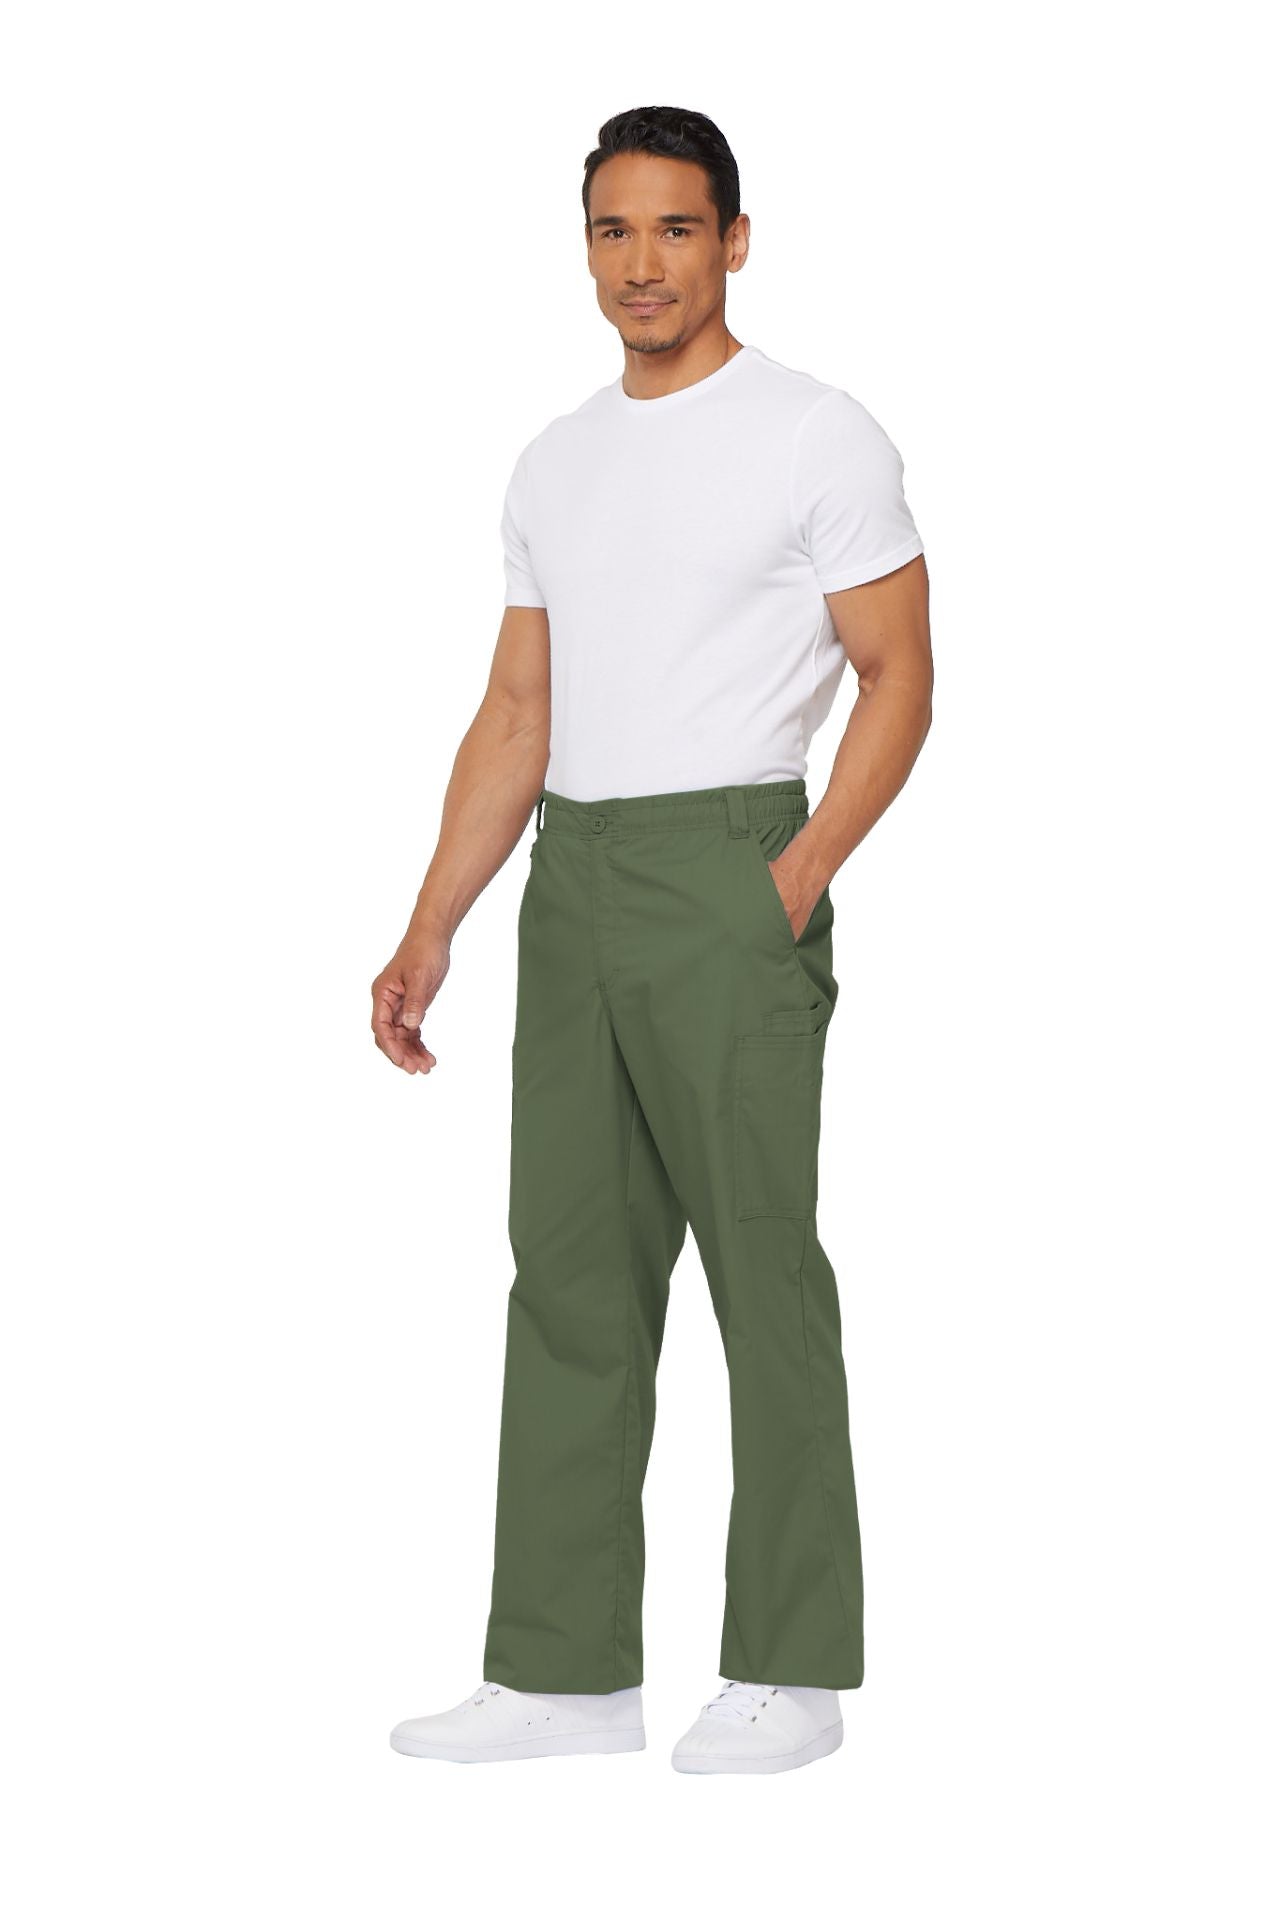 Olive - Dickies EDS Signature Men's Natural Rise Zip Fly Pull On Pant